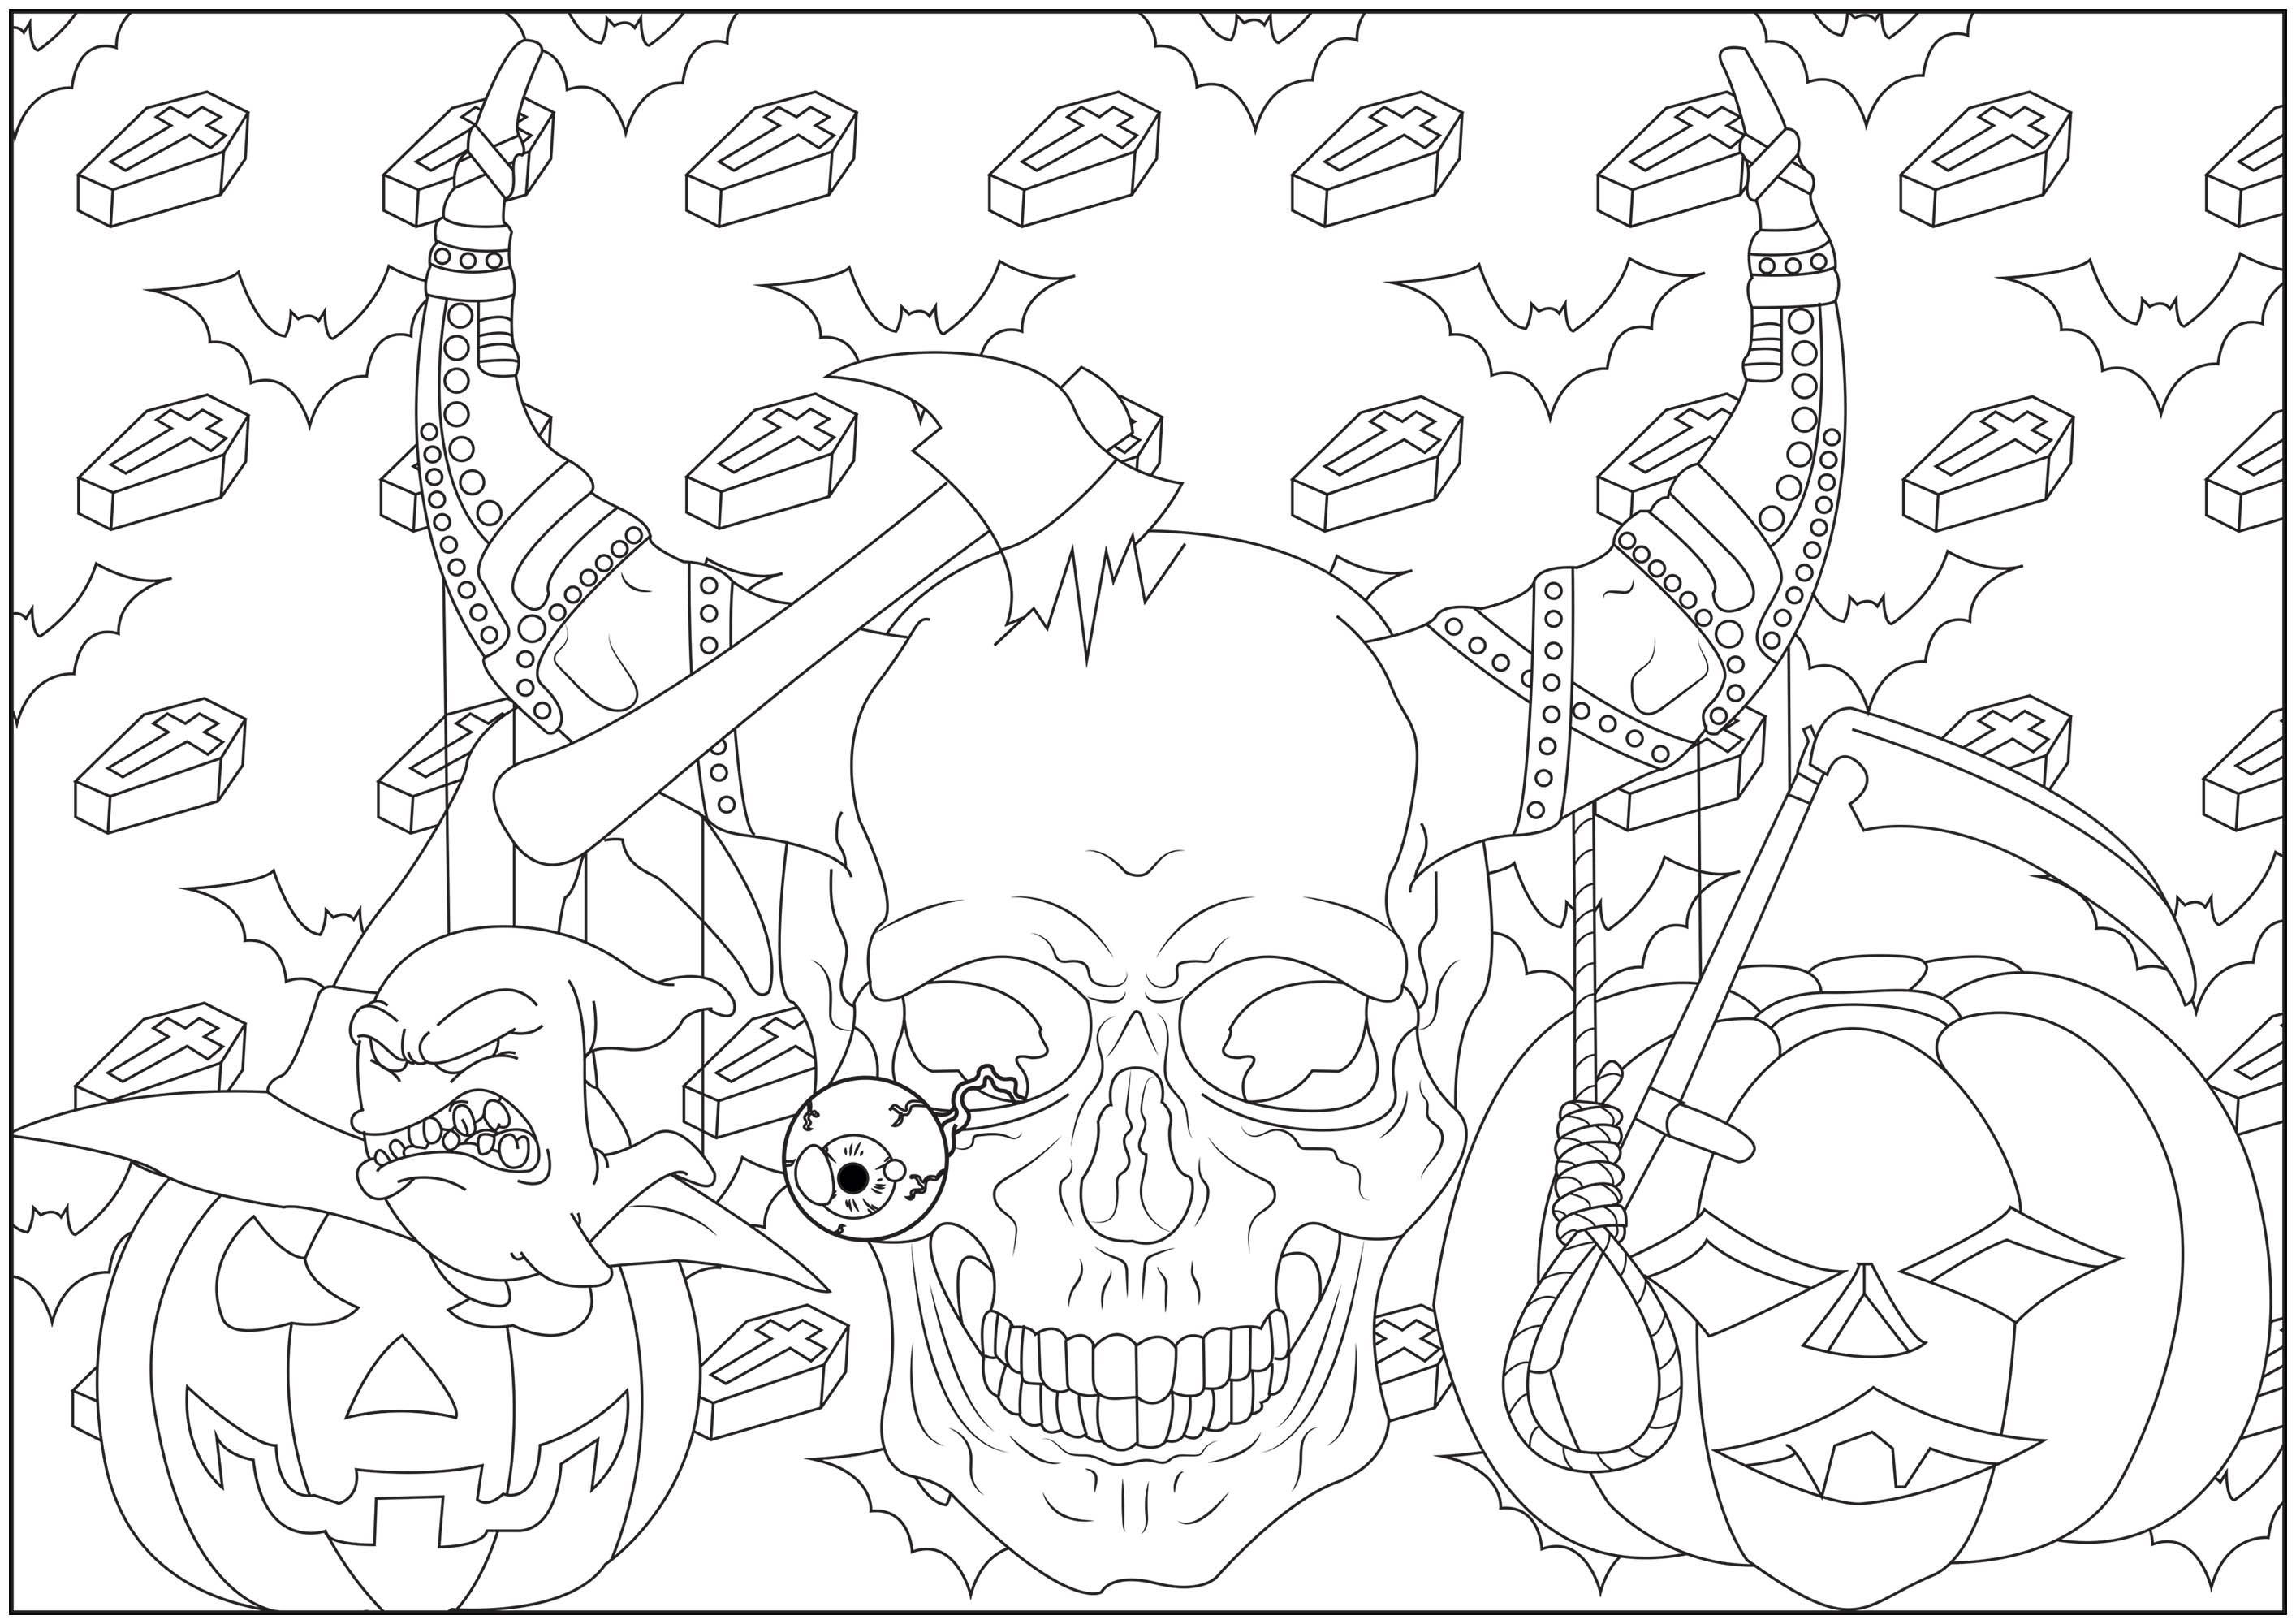 Halloween skull - Halloween Adult Coloring Pages